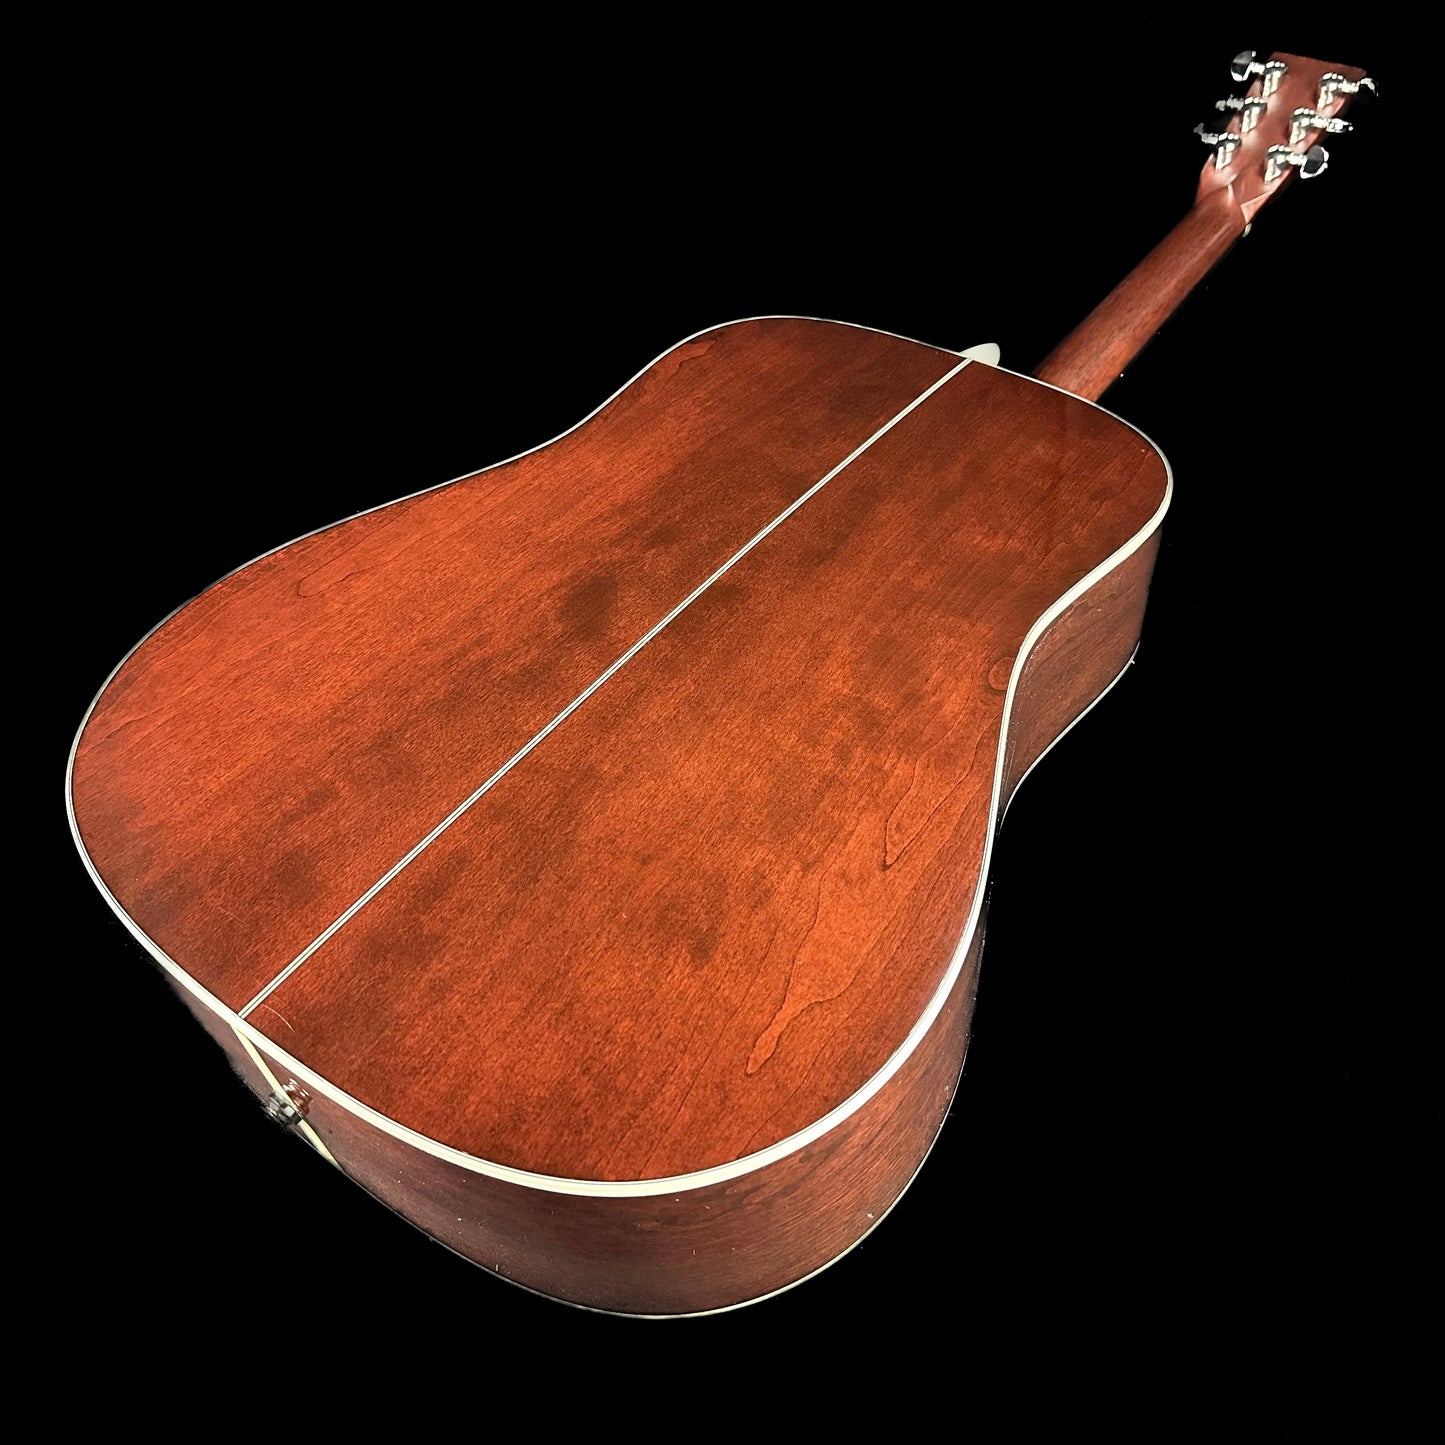 Back angle of Used 2010 Martin D Cherry